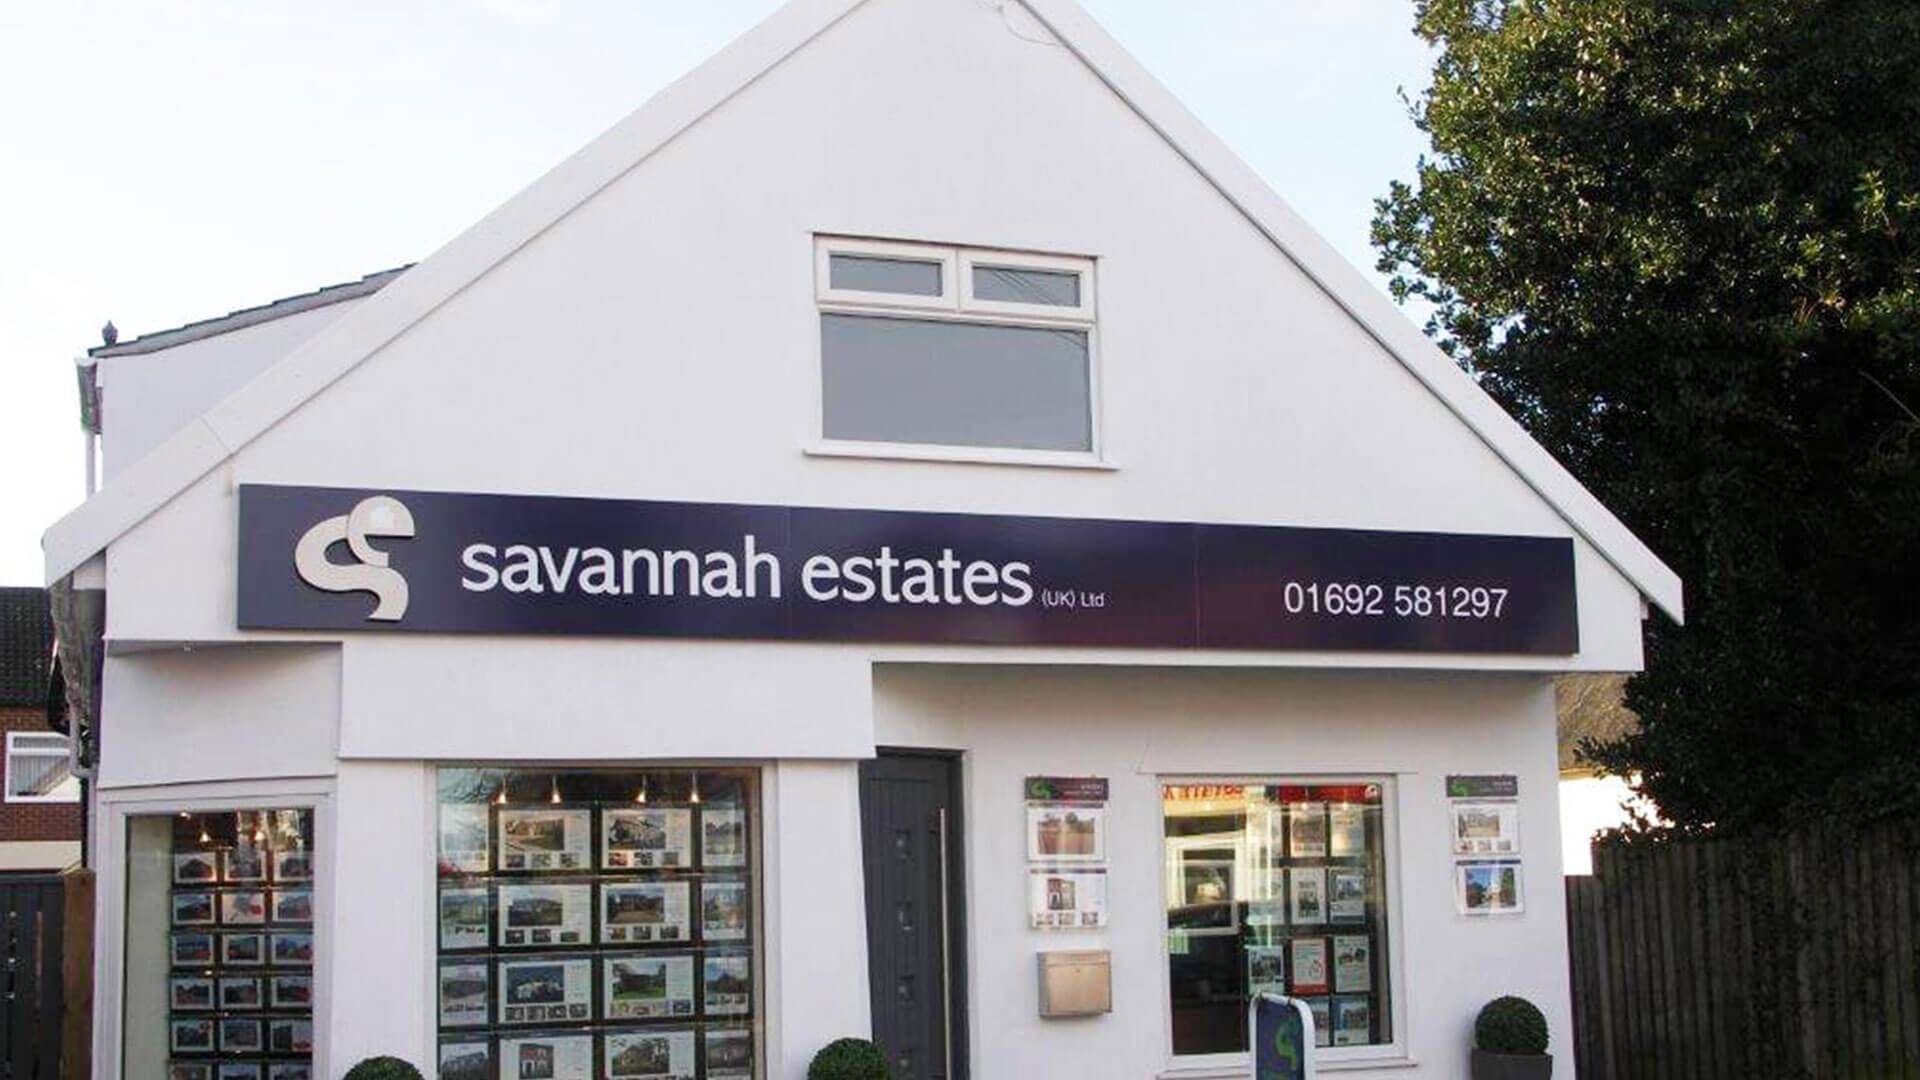 Websters Estate Agents is delighted to announce the acquisition of Savannah Estates.